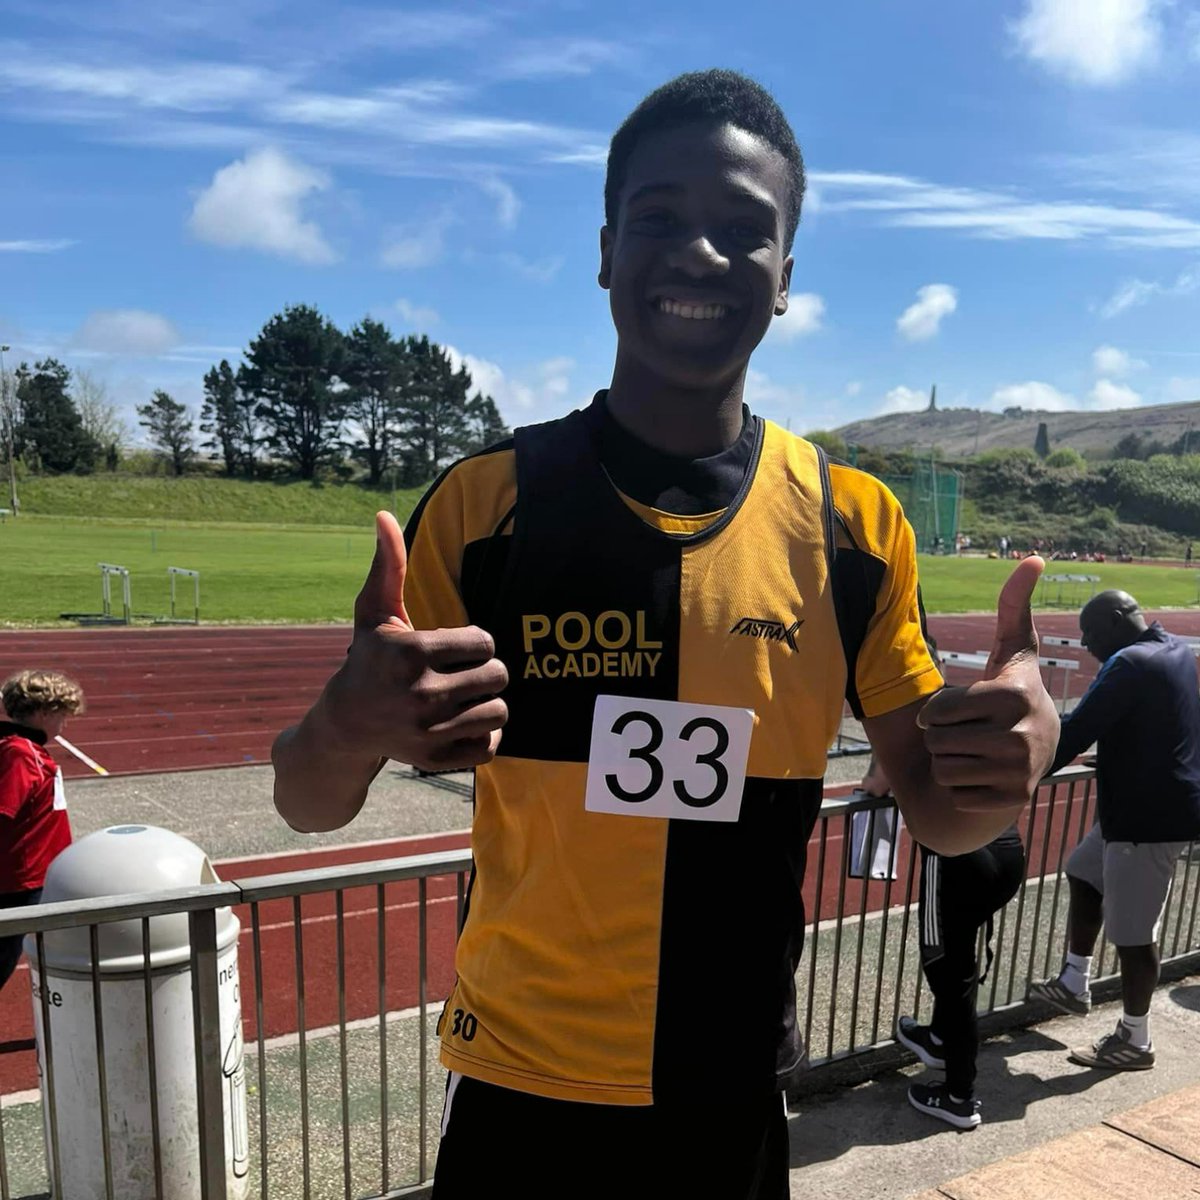 Congratulations to all the Pool Academy boys who competed in the ESAA competition. It was a great atmosphere and opportunity for the students to experience competing on the track. A great day had and finished with a win for the junior boys relay in their heat. #ESAAcompetition